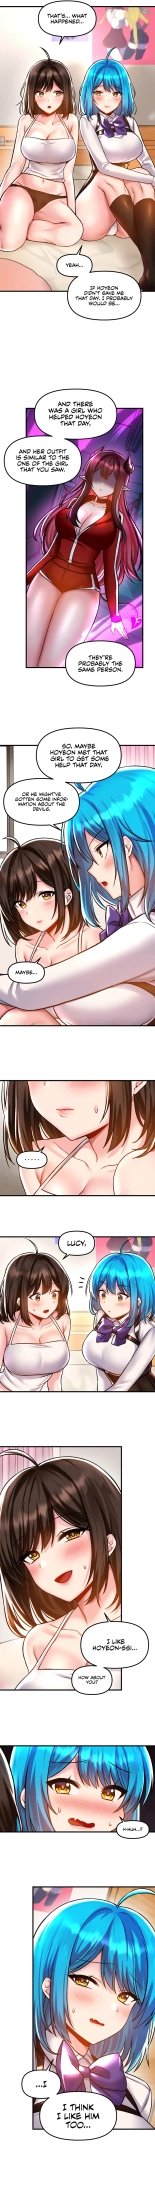 Trapped in the Academy's Eroge : page 340